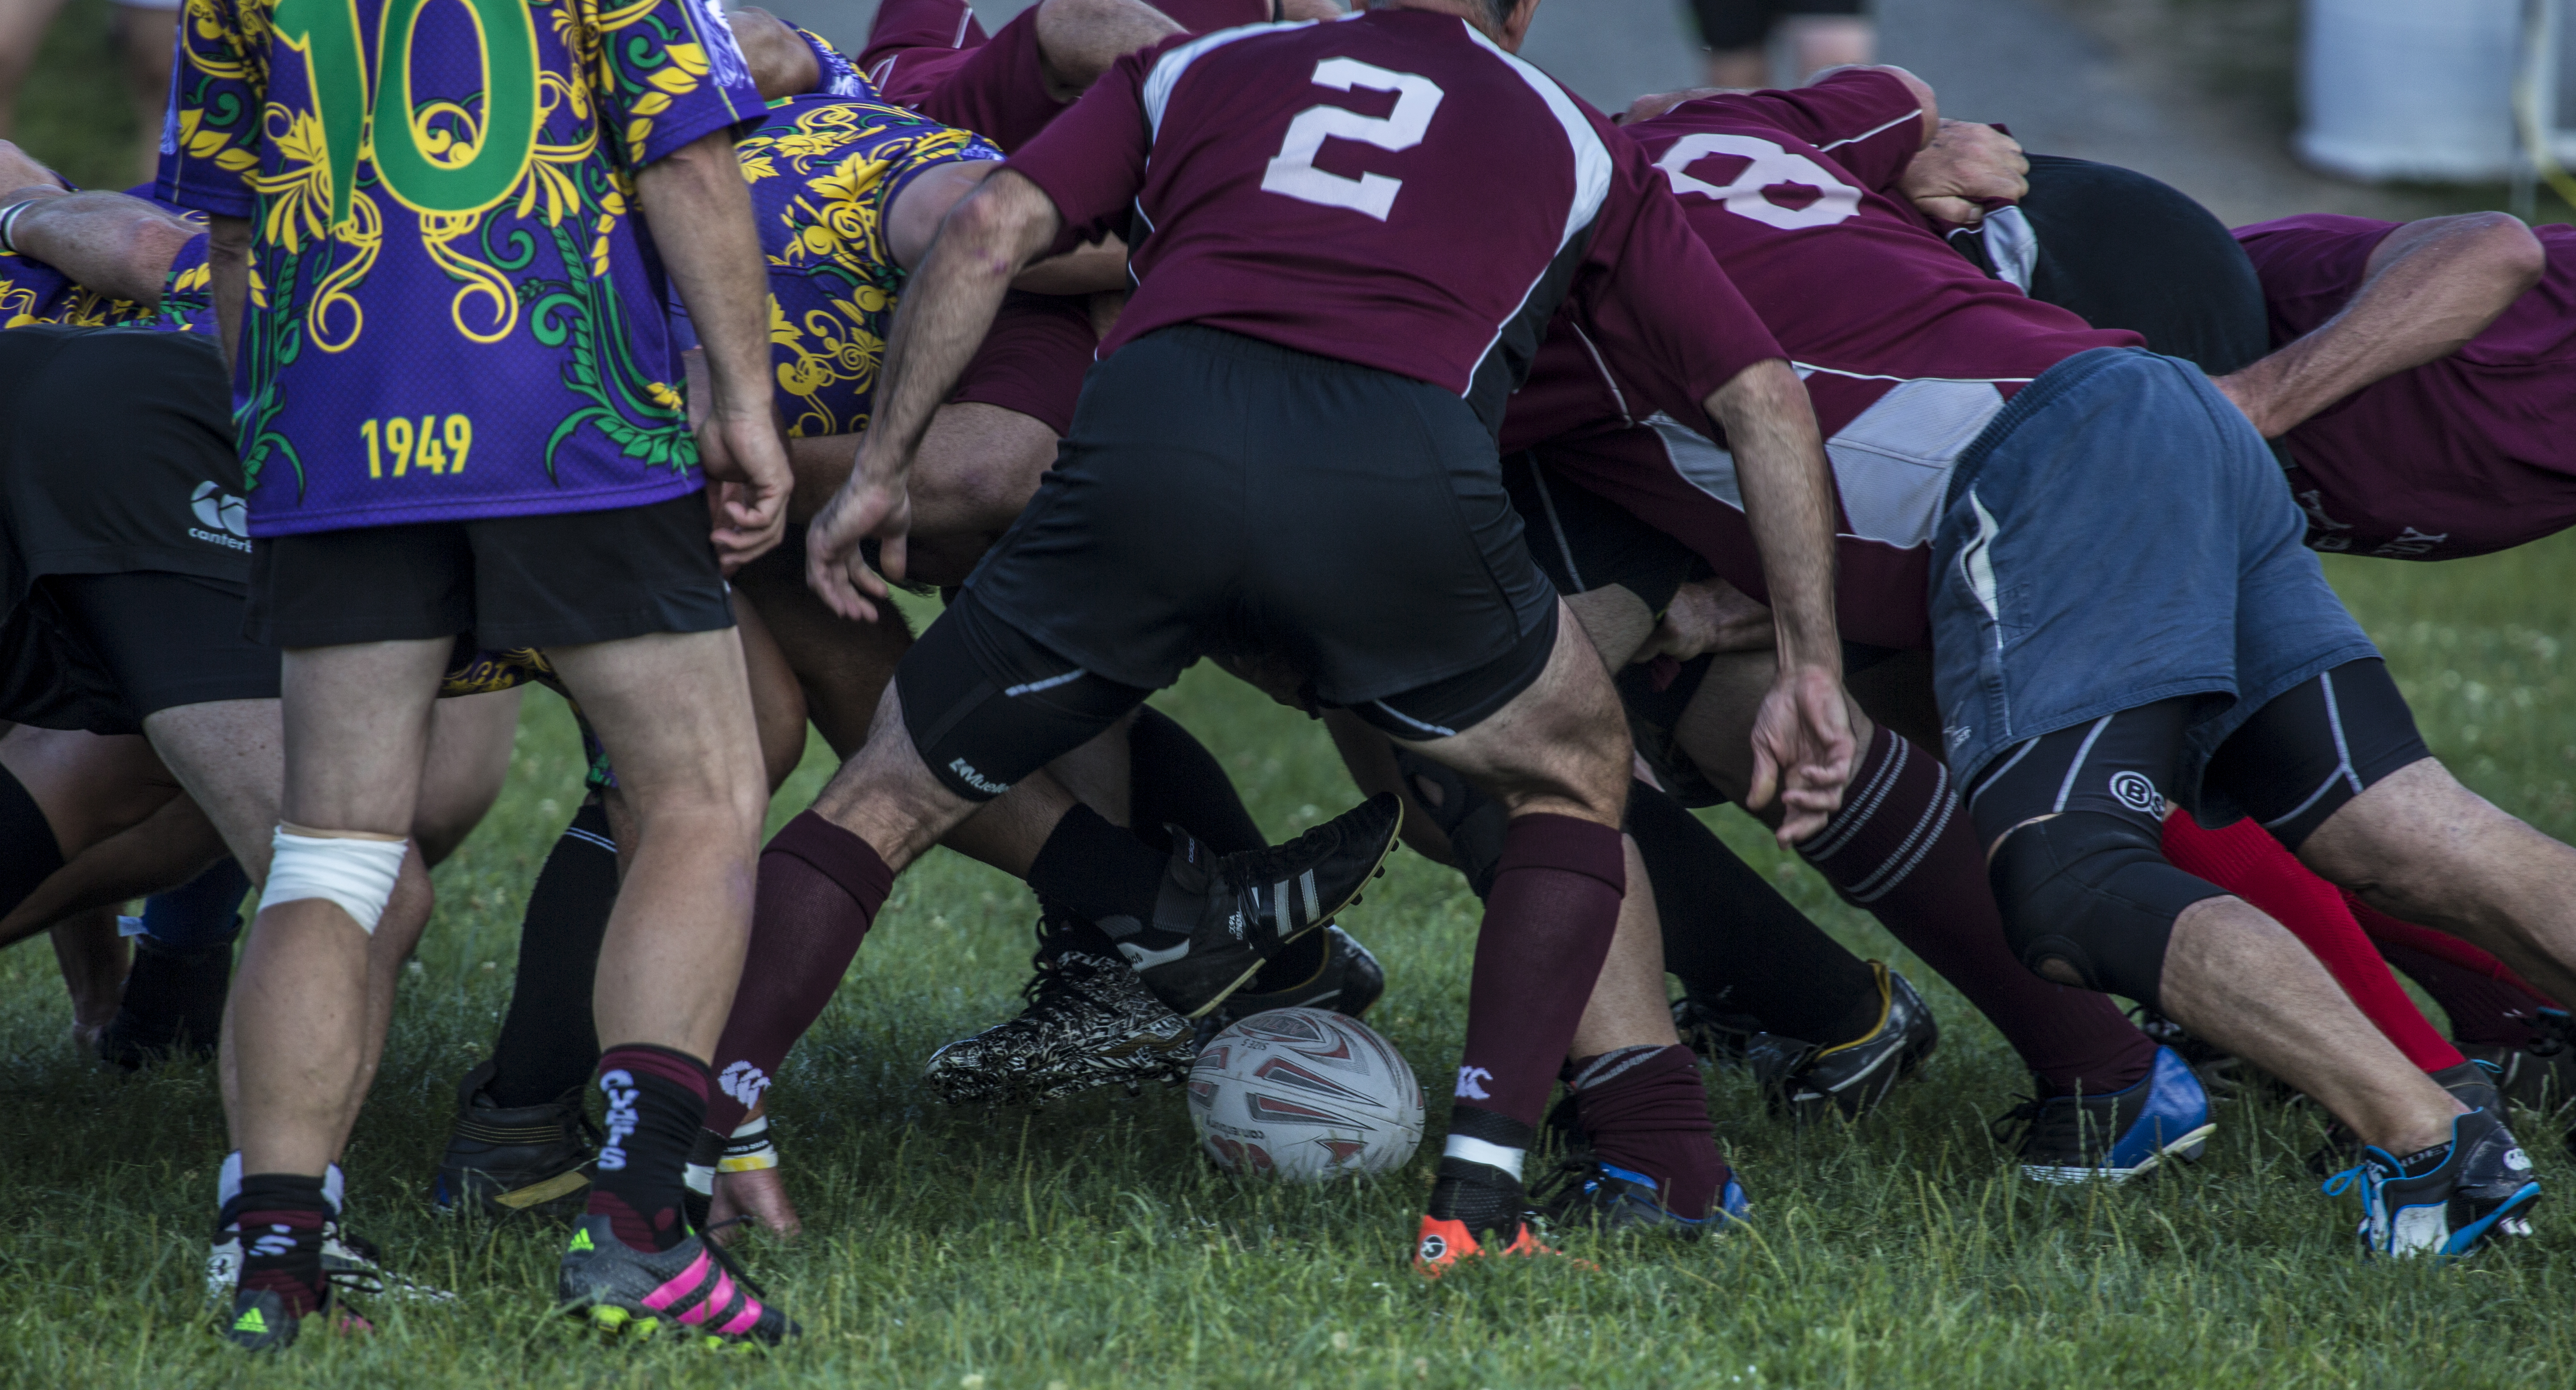 Rugy players pile up in a scrum